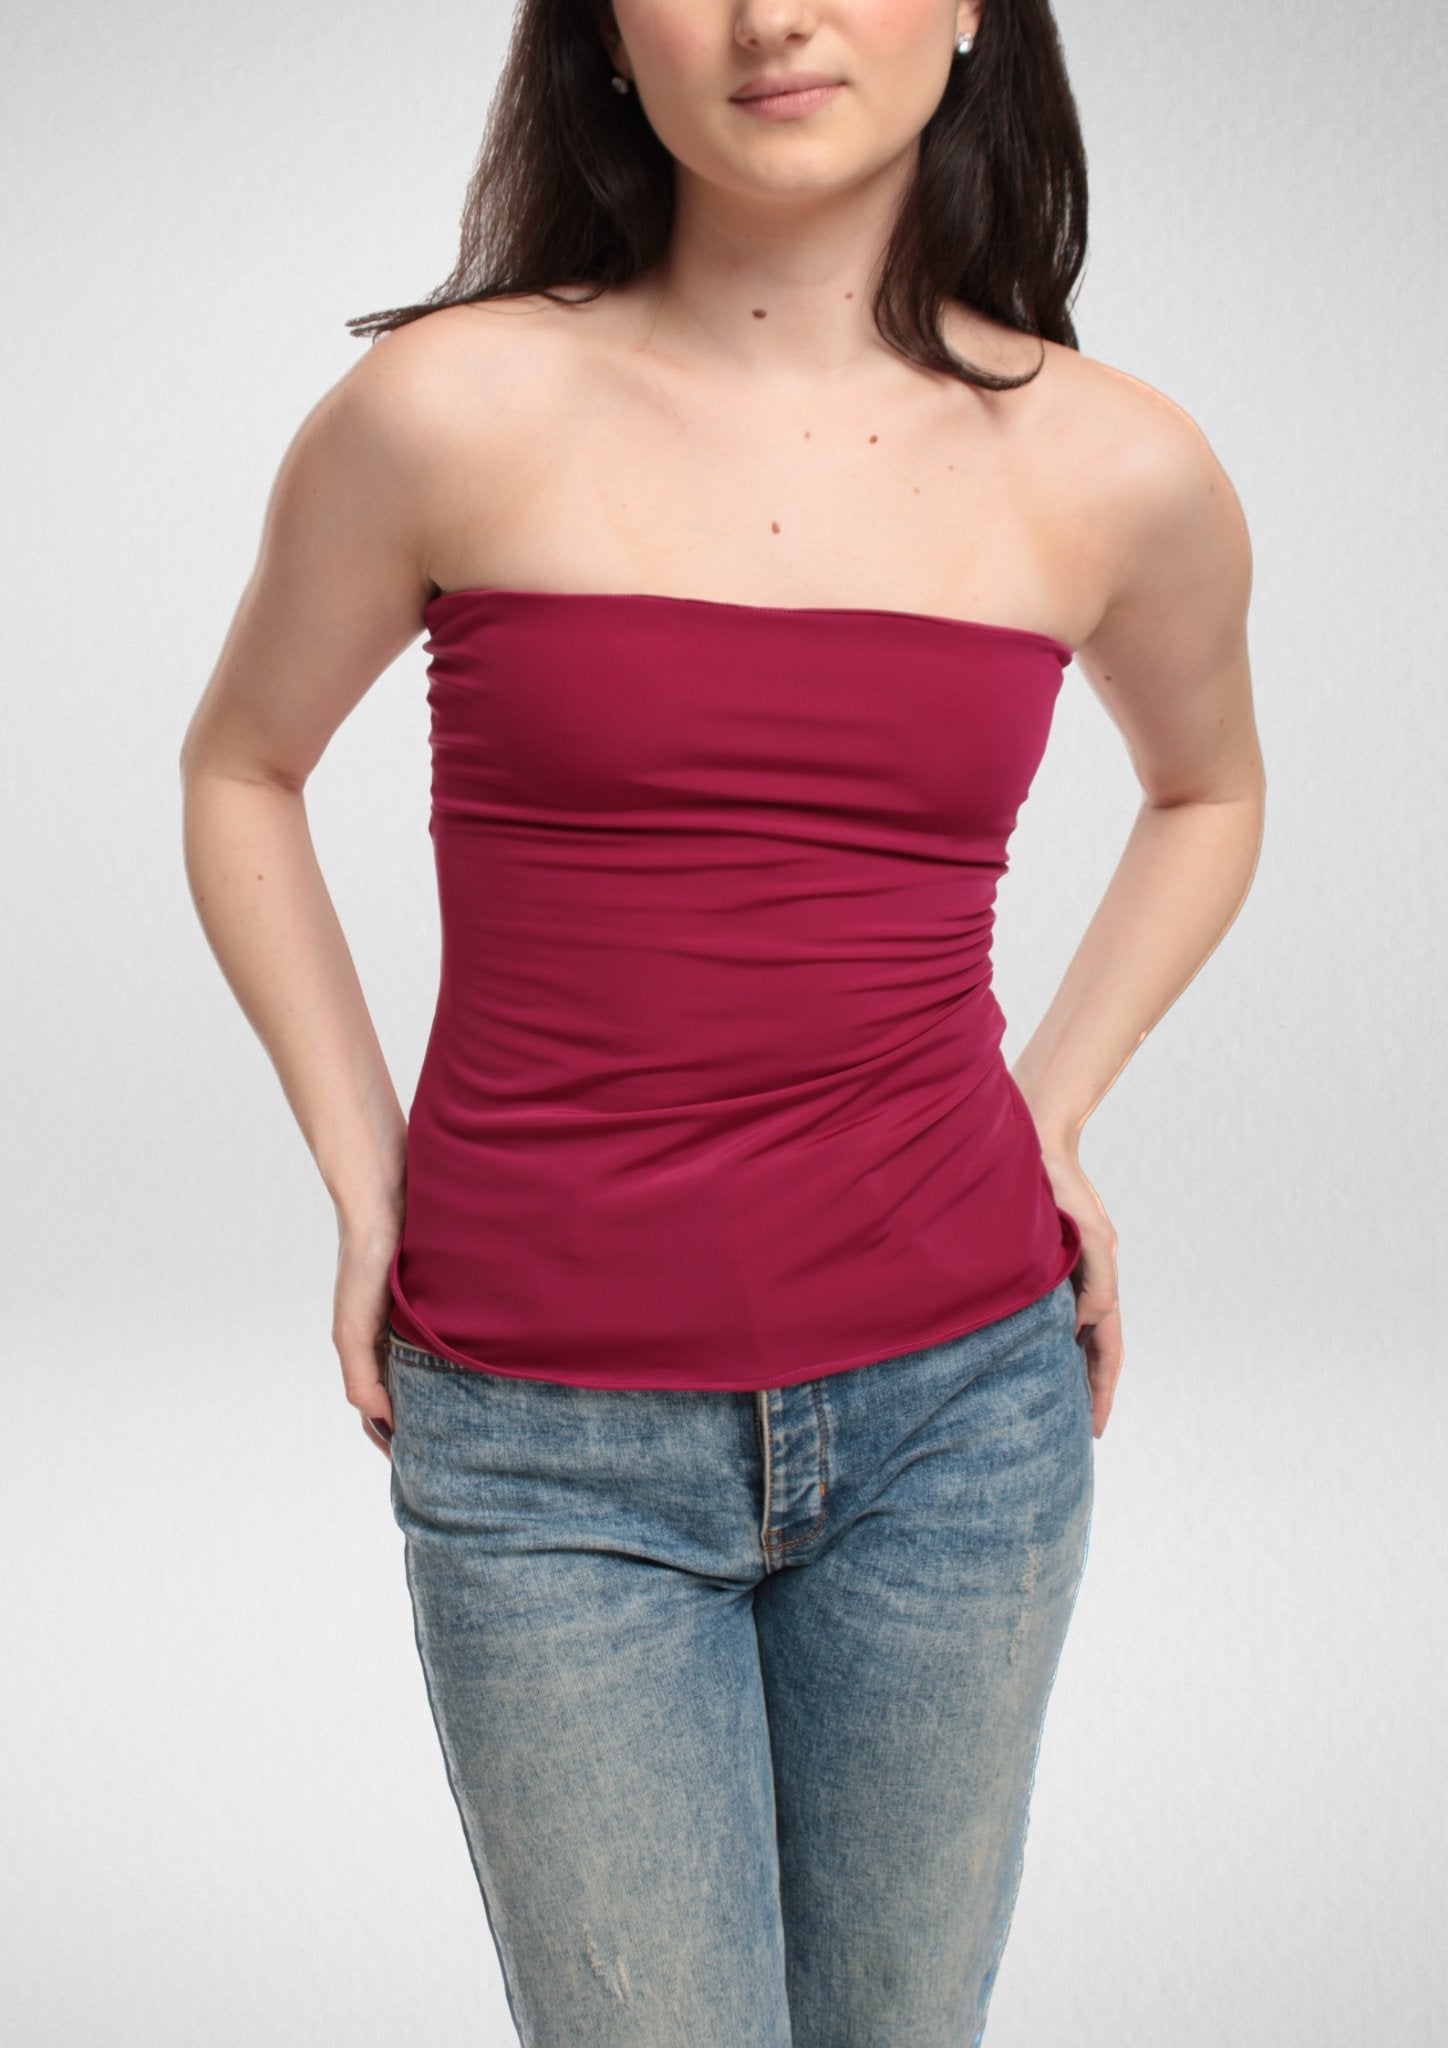 Strapless Bandeau Tube Top Sewing Pattern [Luna] - Friedlies